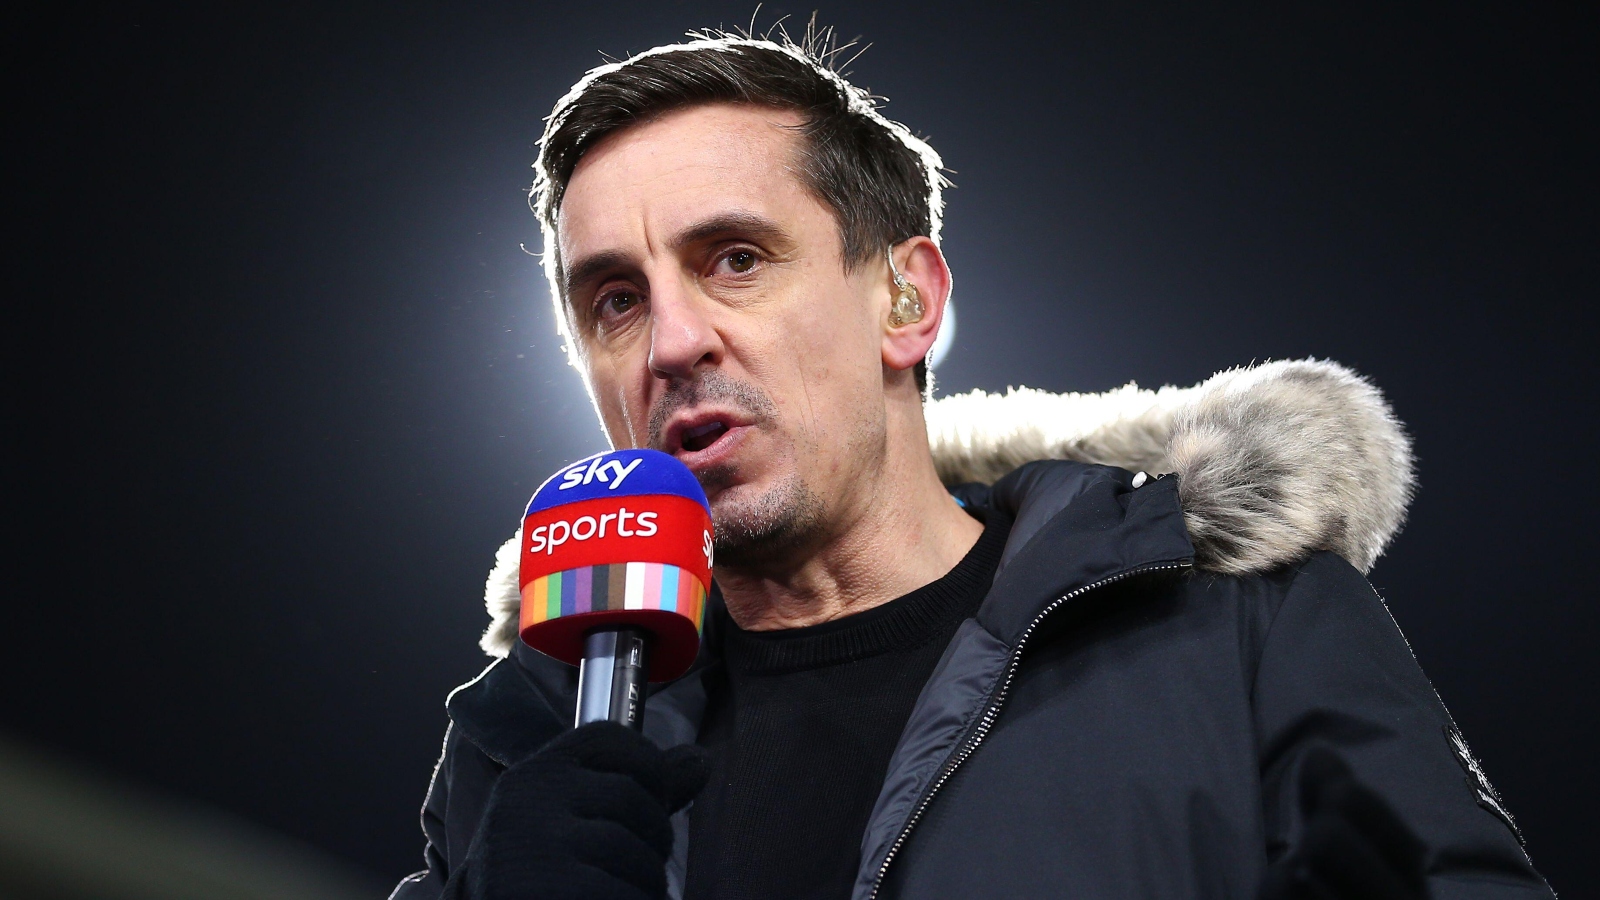 Bring back Man United outcast -- Gary Neville after 2-0 defeat